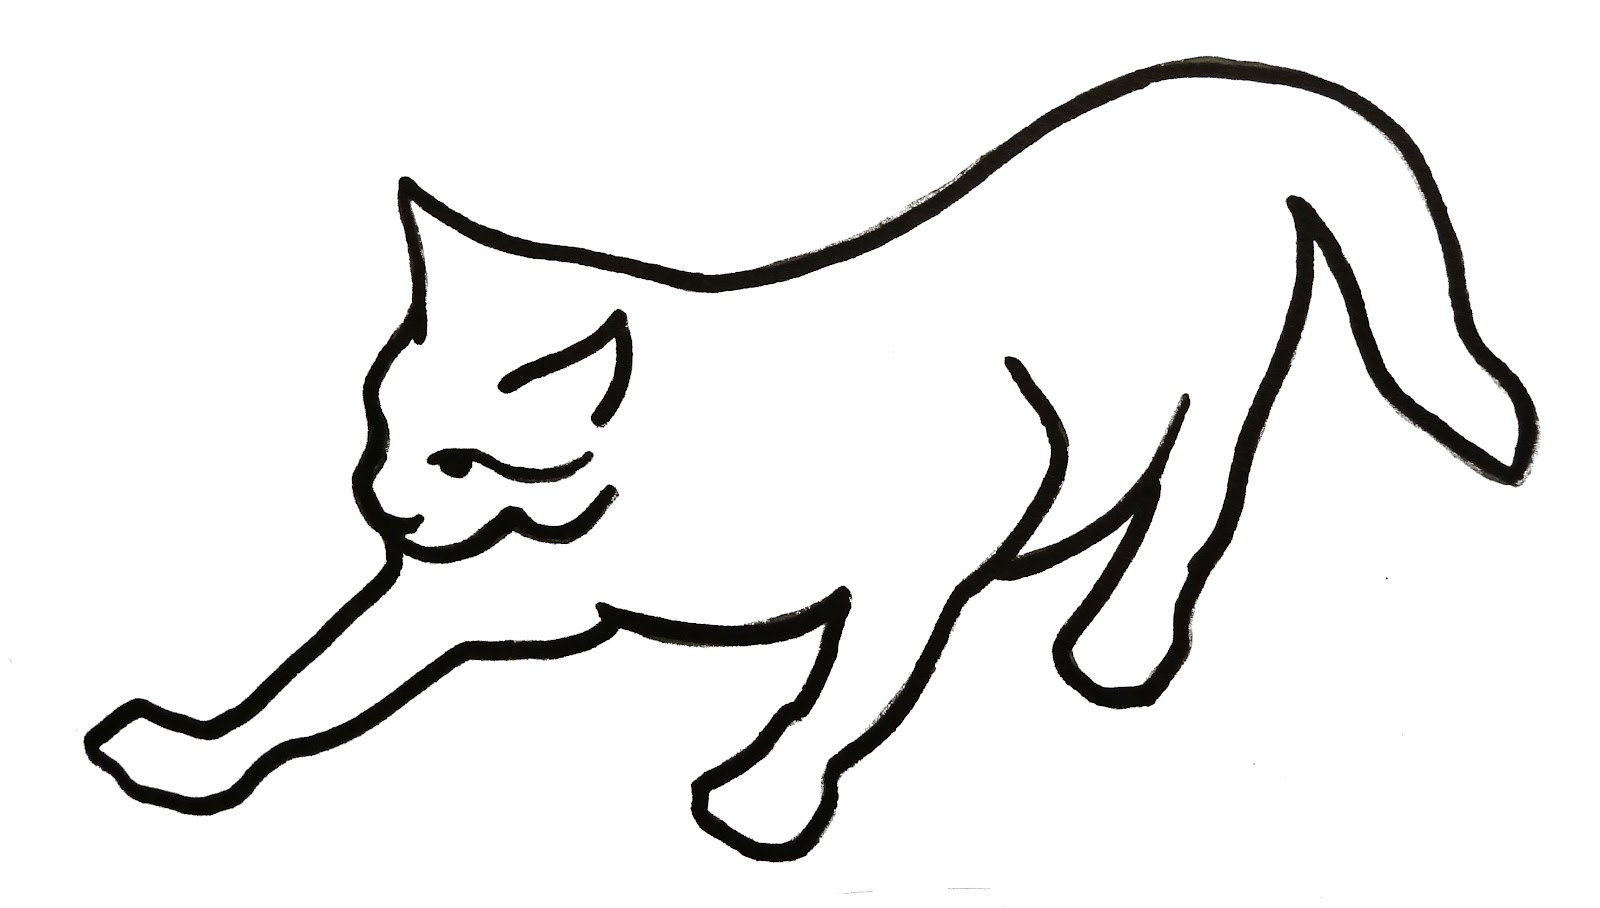 Simple Cat Drawings - ClipArt Best